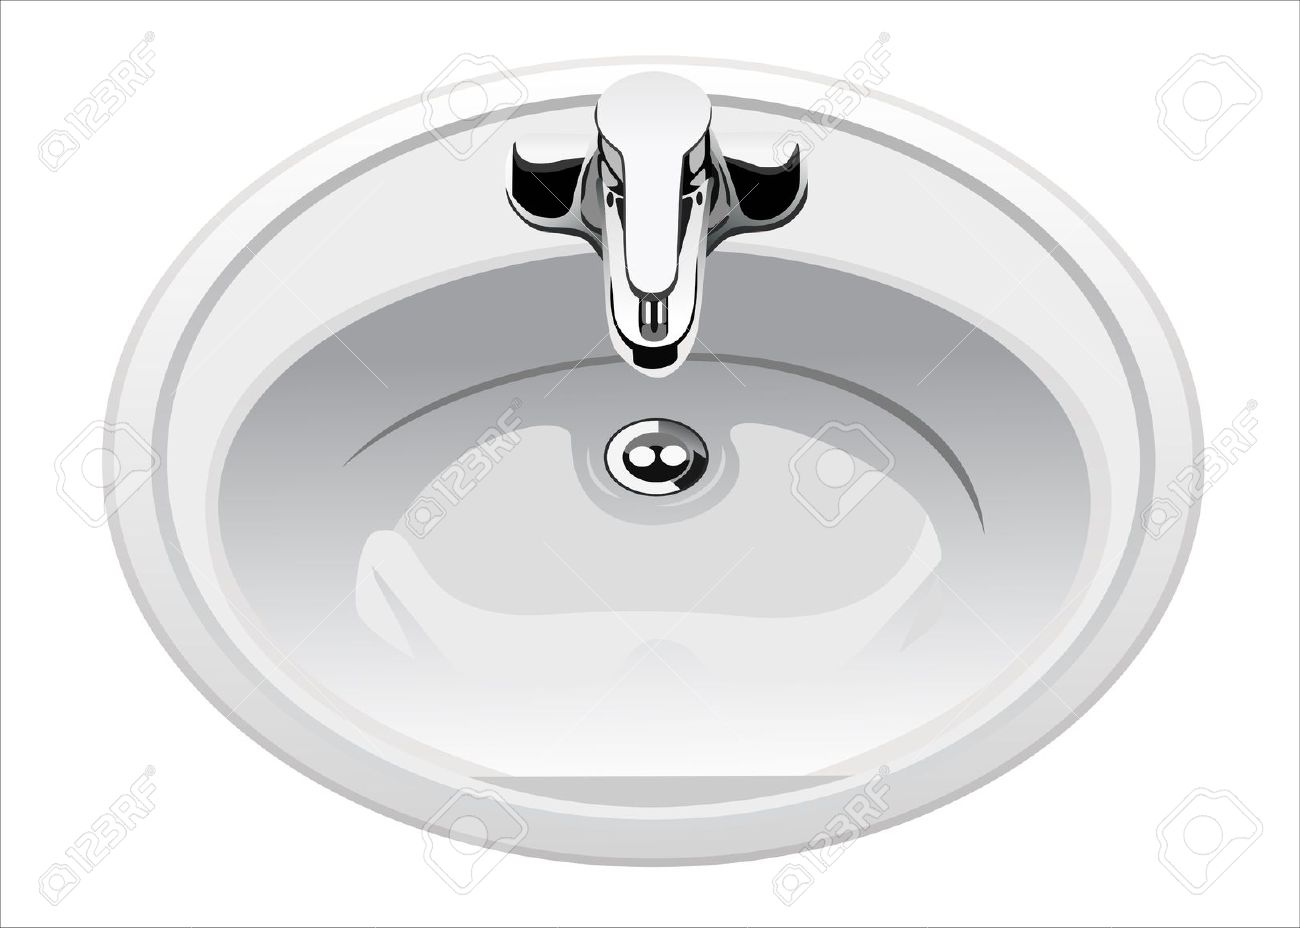 Ceramic White Washing Sink Royalty Free Cliparts, Vectors, And.